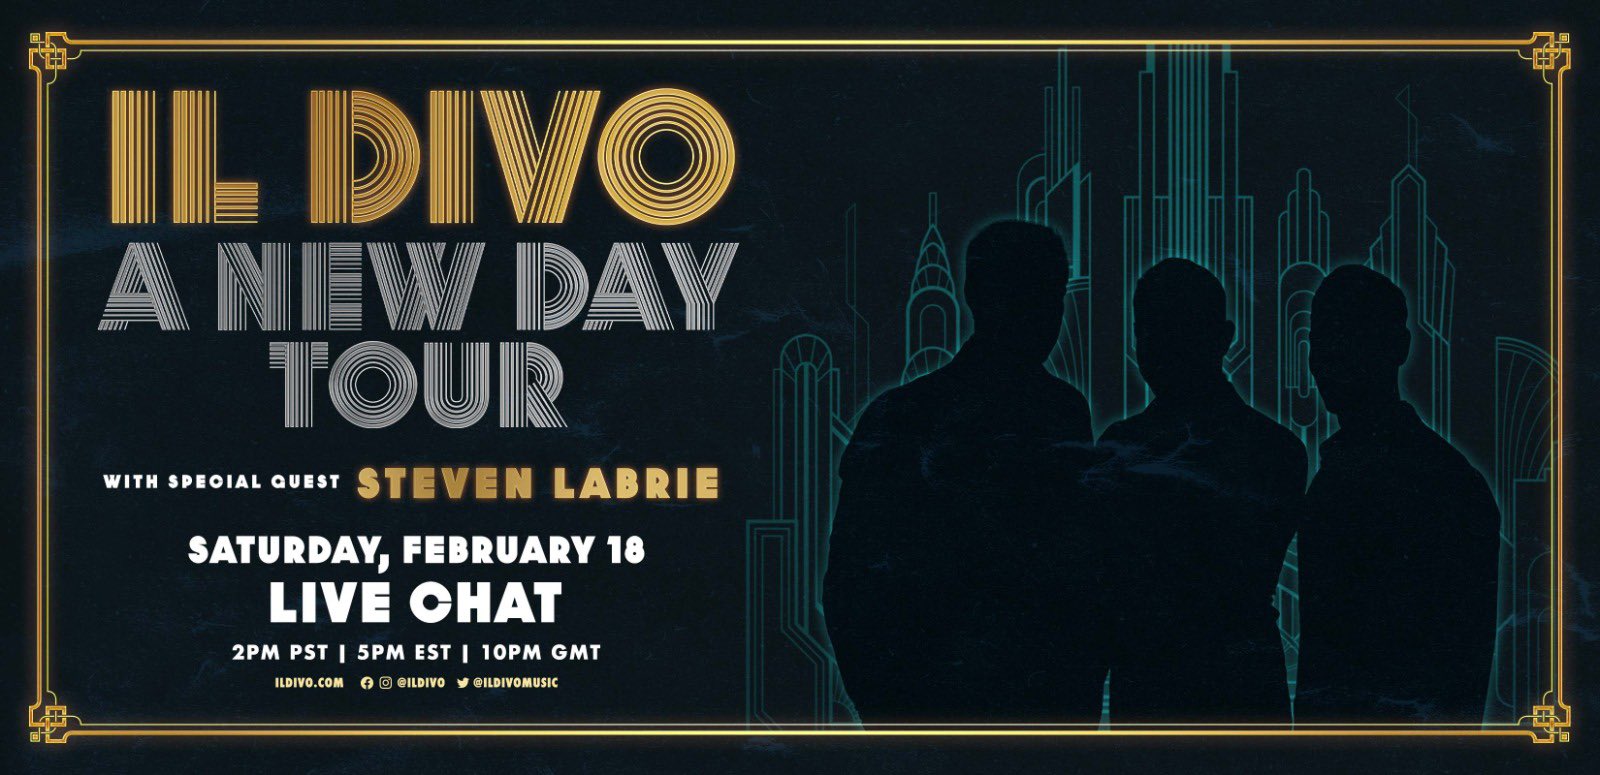 Il Divo on Twitter: "Join Il Divo TODAY on YouTube at 2pm PST / 5pm EST /  10pm GMT for a special livestream chat during rehearsals for their upcoming  #ANewDayTour 💛✨ Tune